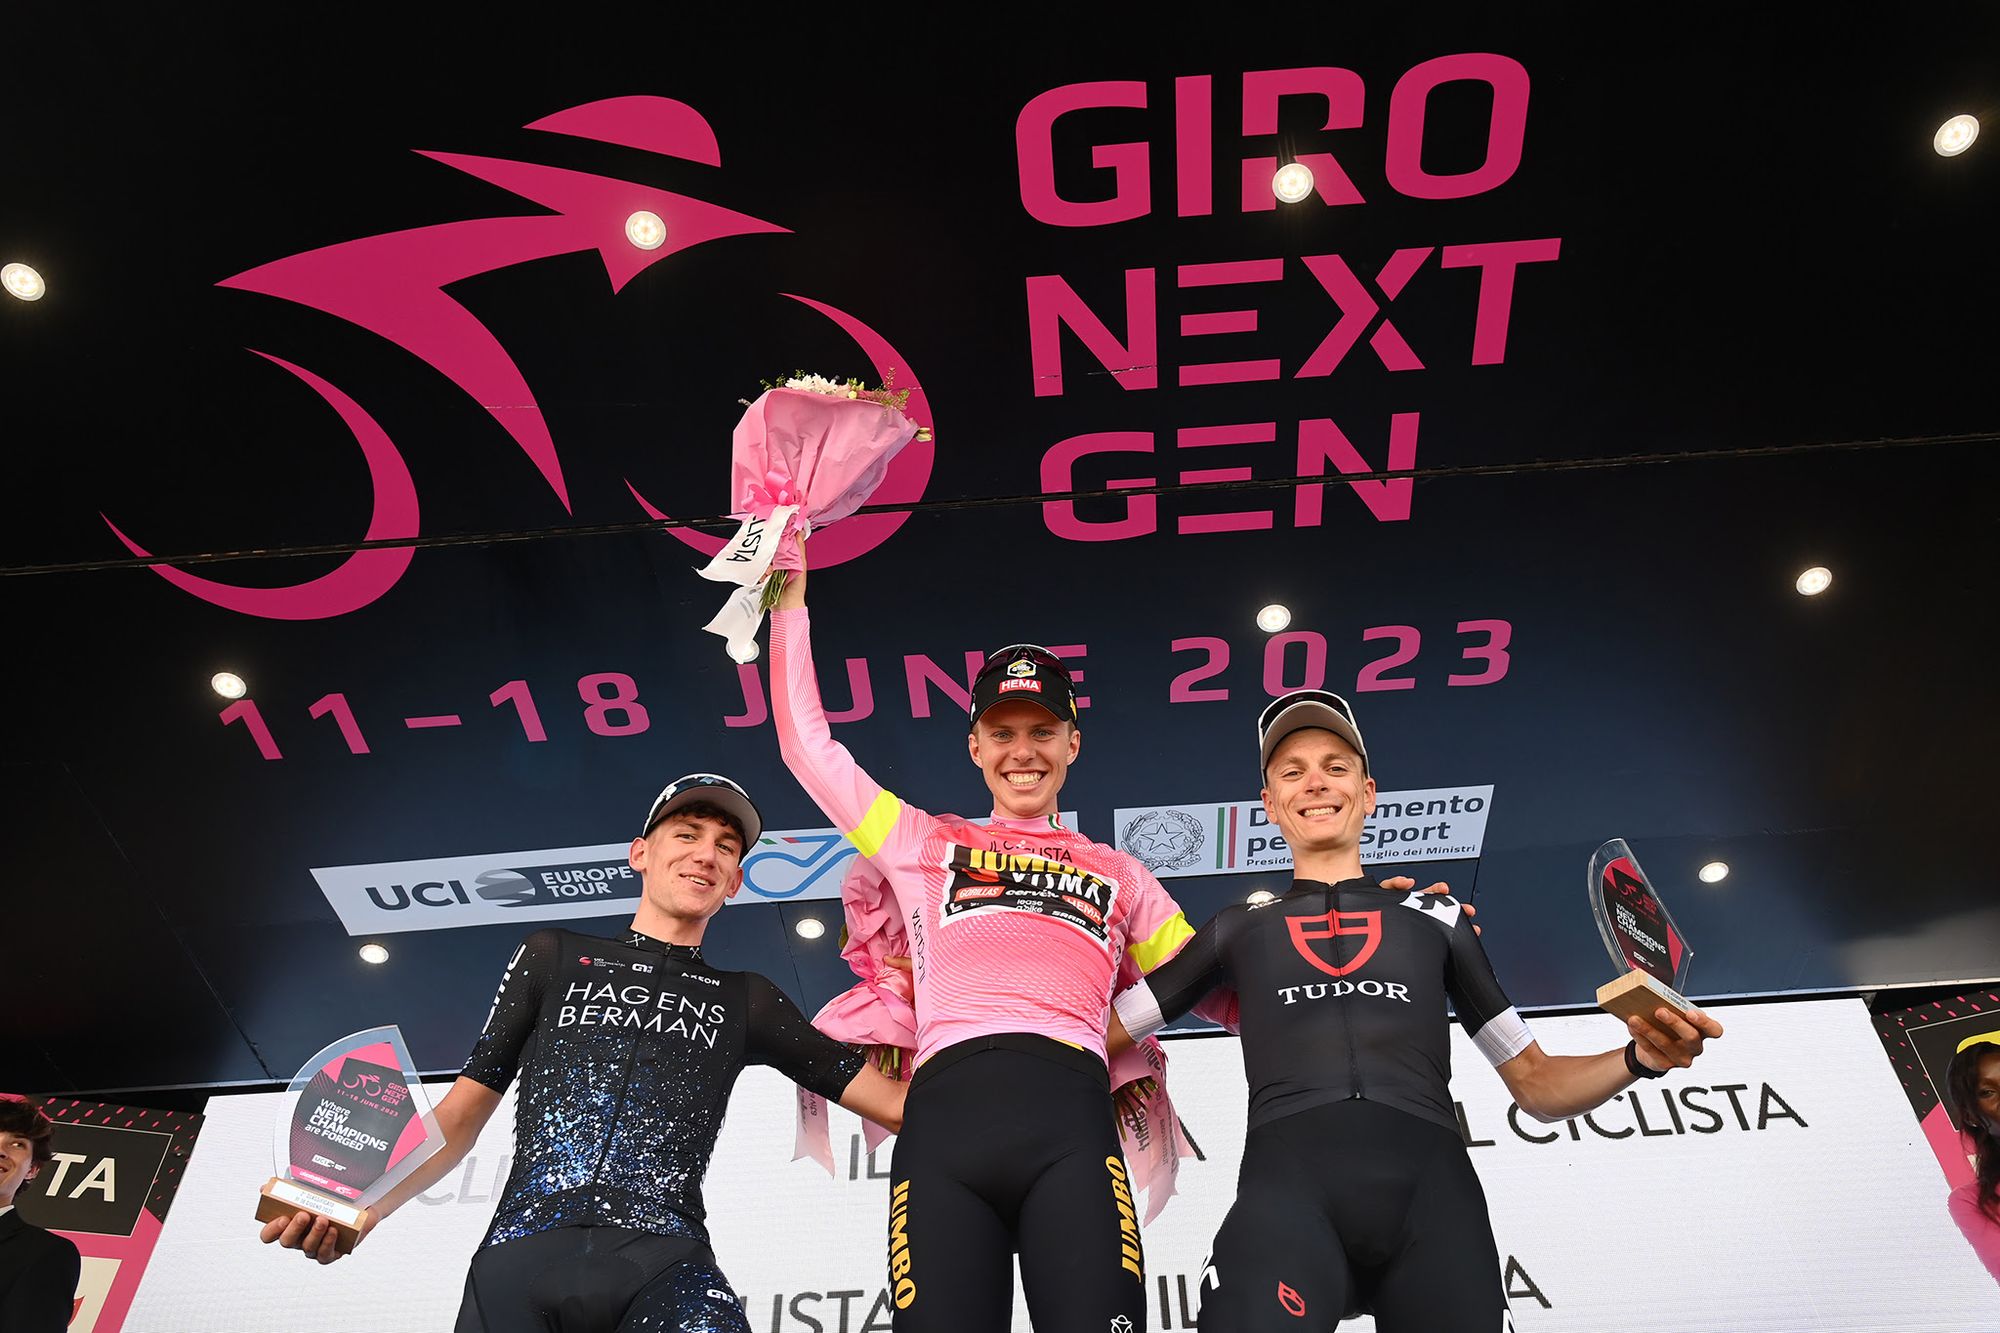 Johannes Staune-Mittet vince il Giro Next Gen. Tappa finale ad Anders Foldager